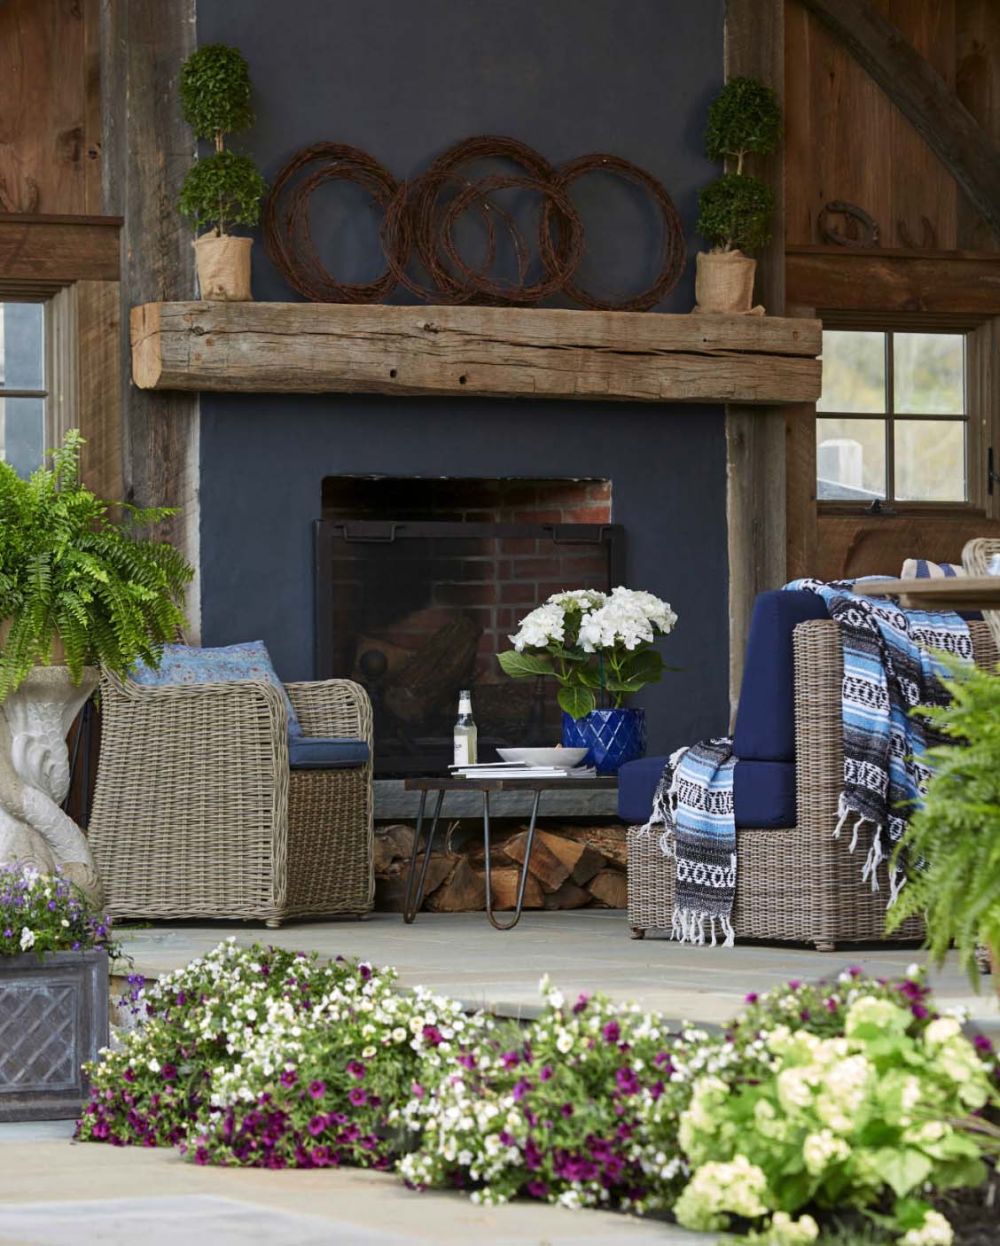 An outdoor fireplace makes the porch feel just a second living room